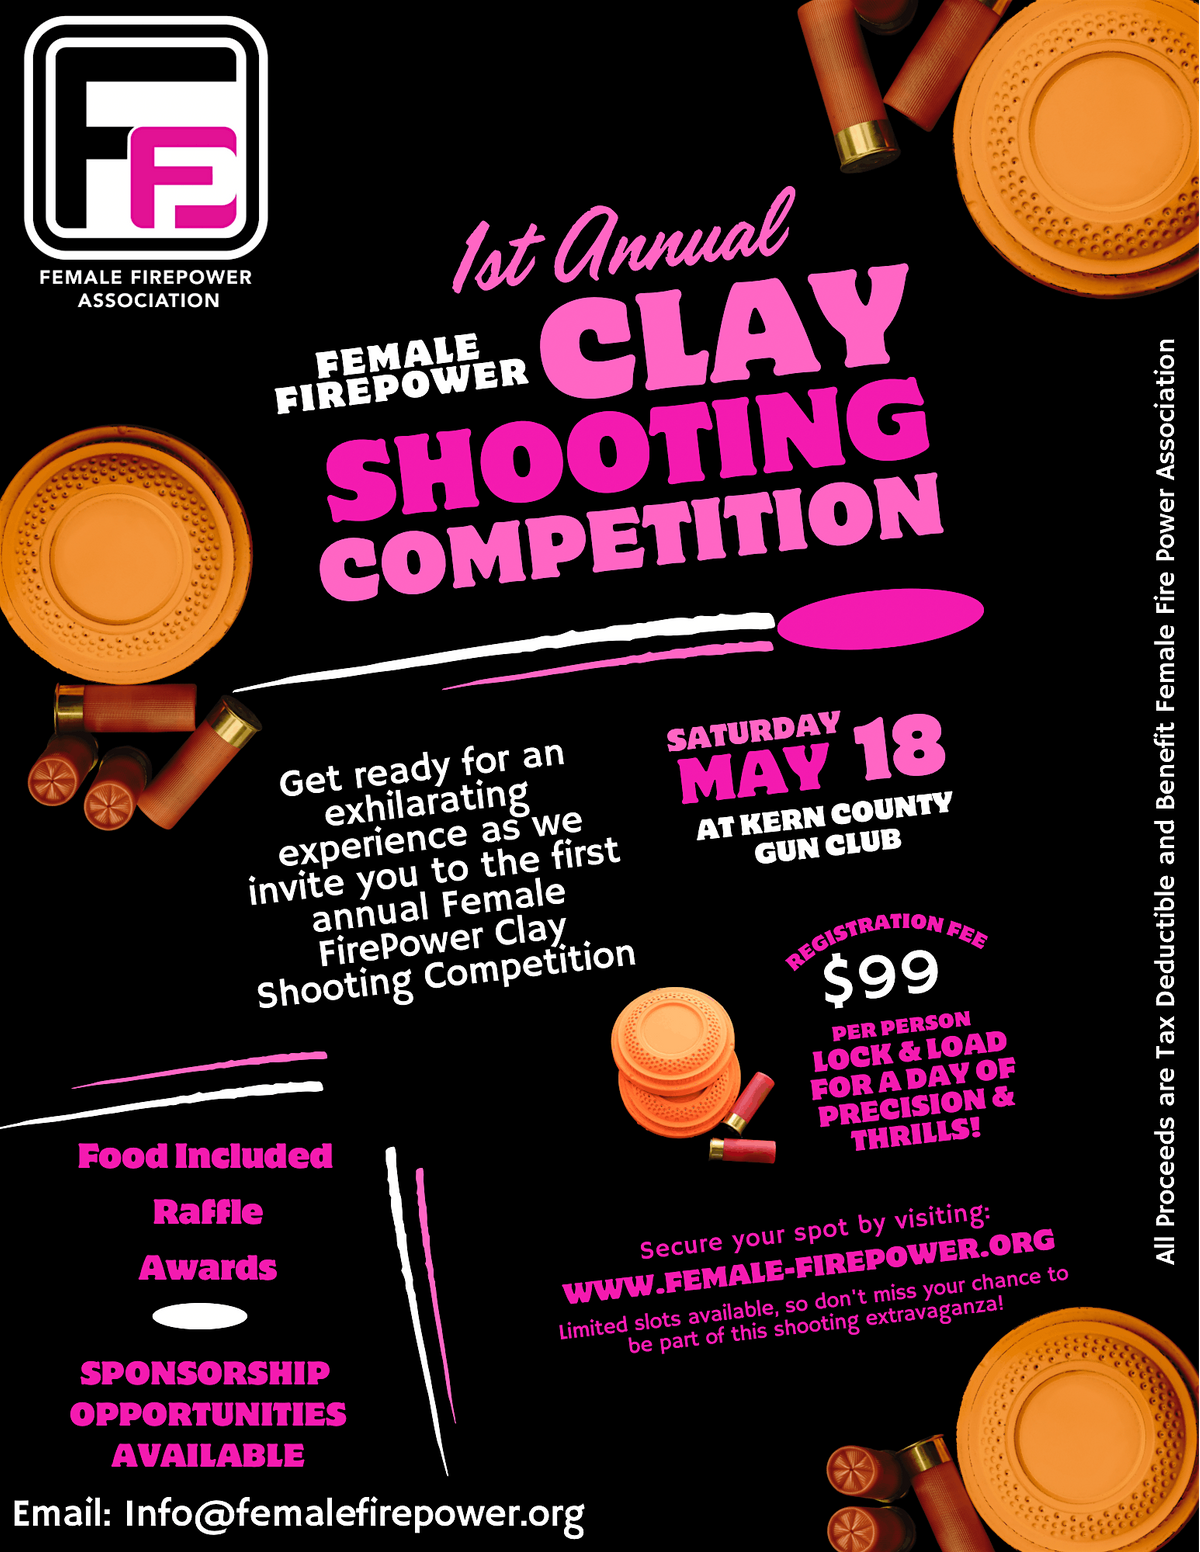 CLAY SHOOTING COMPETETION